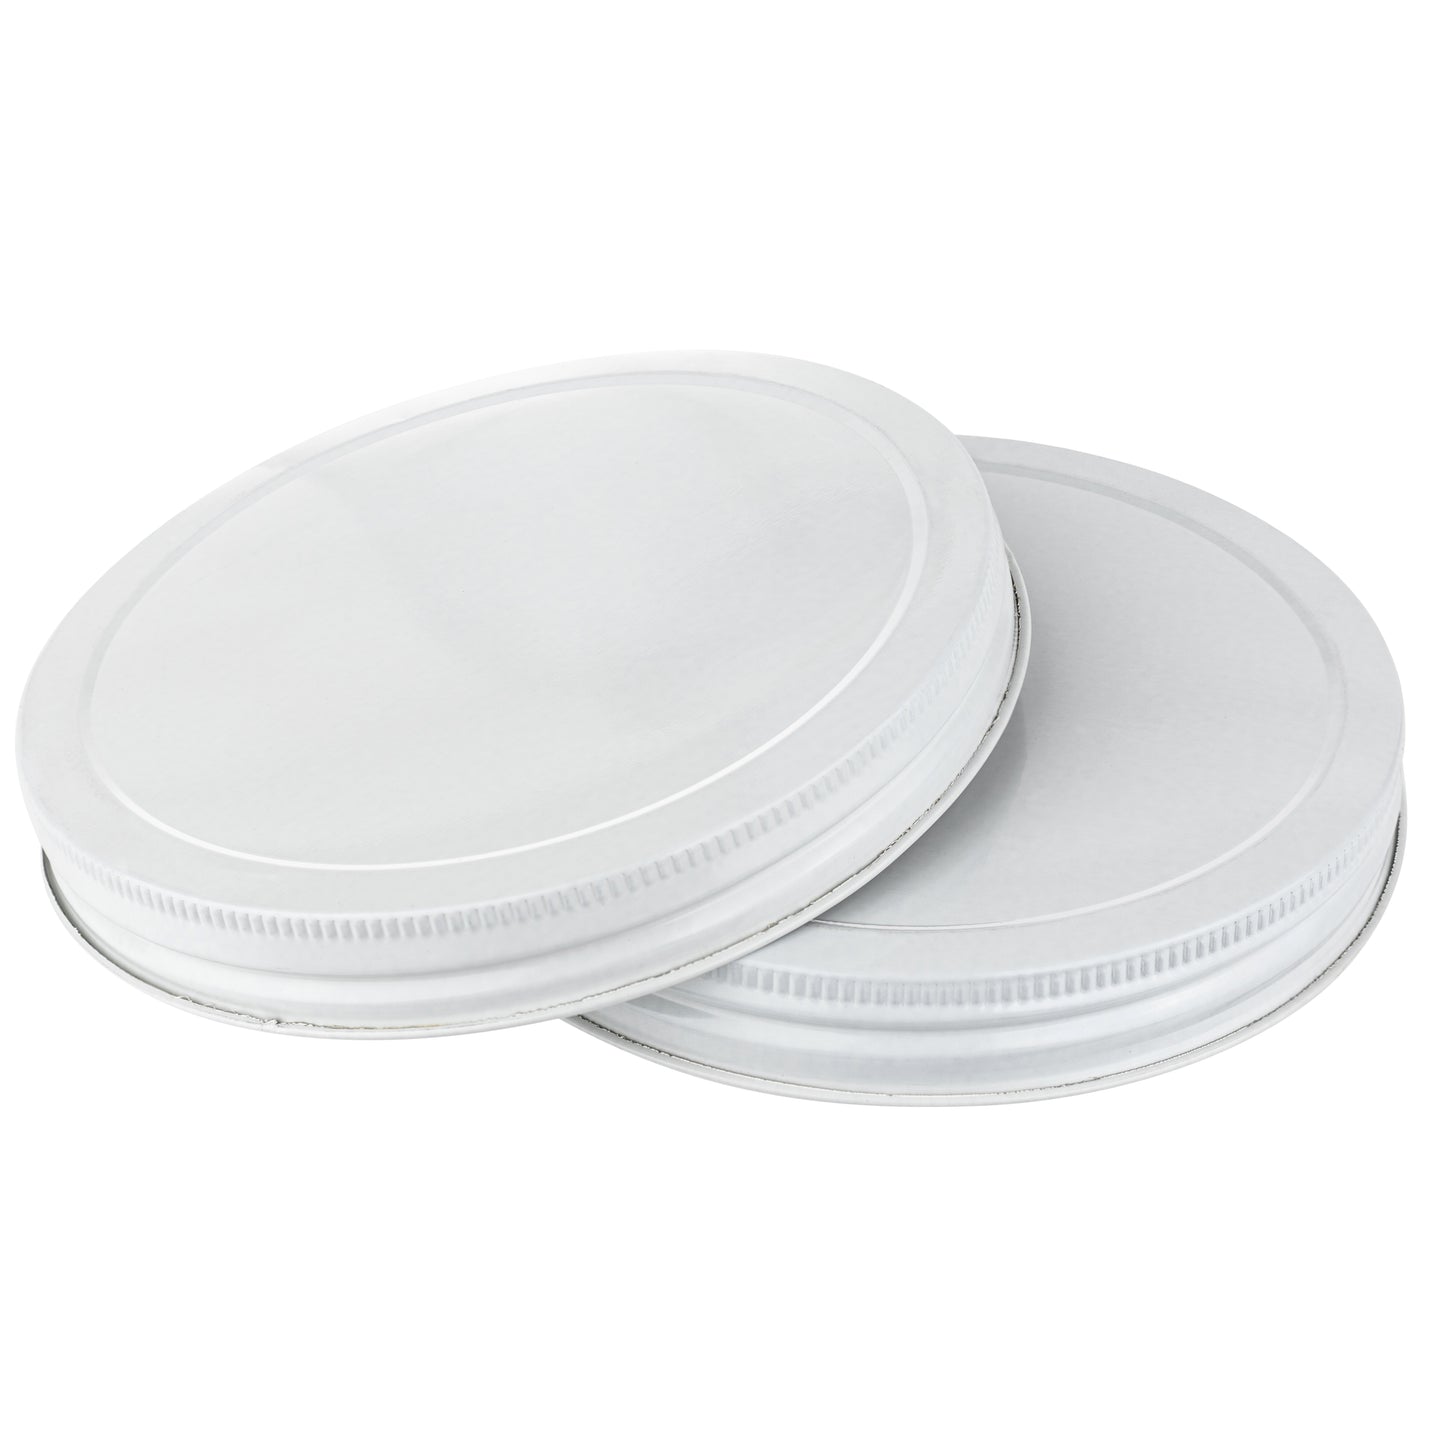 Lids for Gallon and Half Gallon Wide Mouth Jars